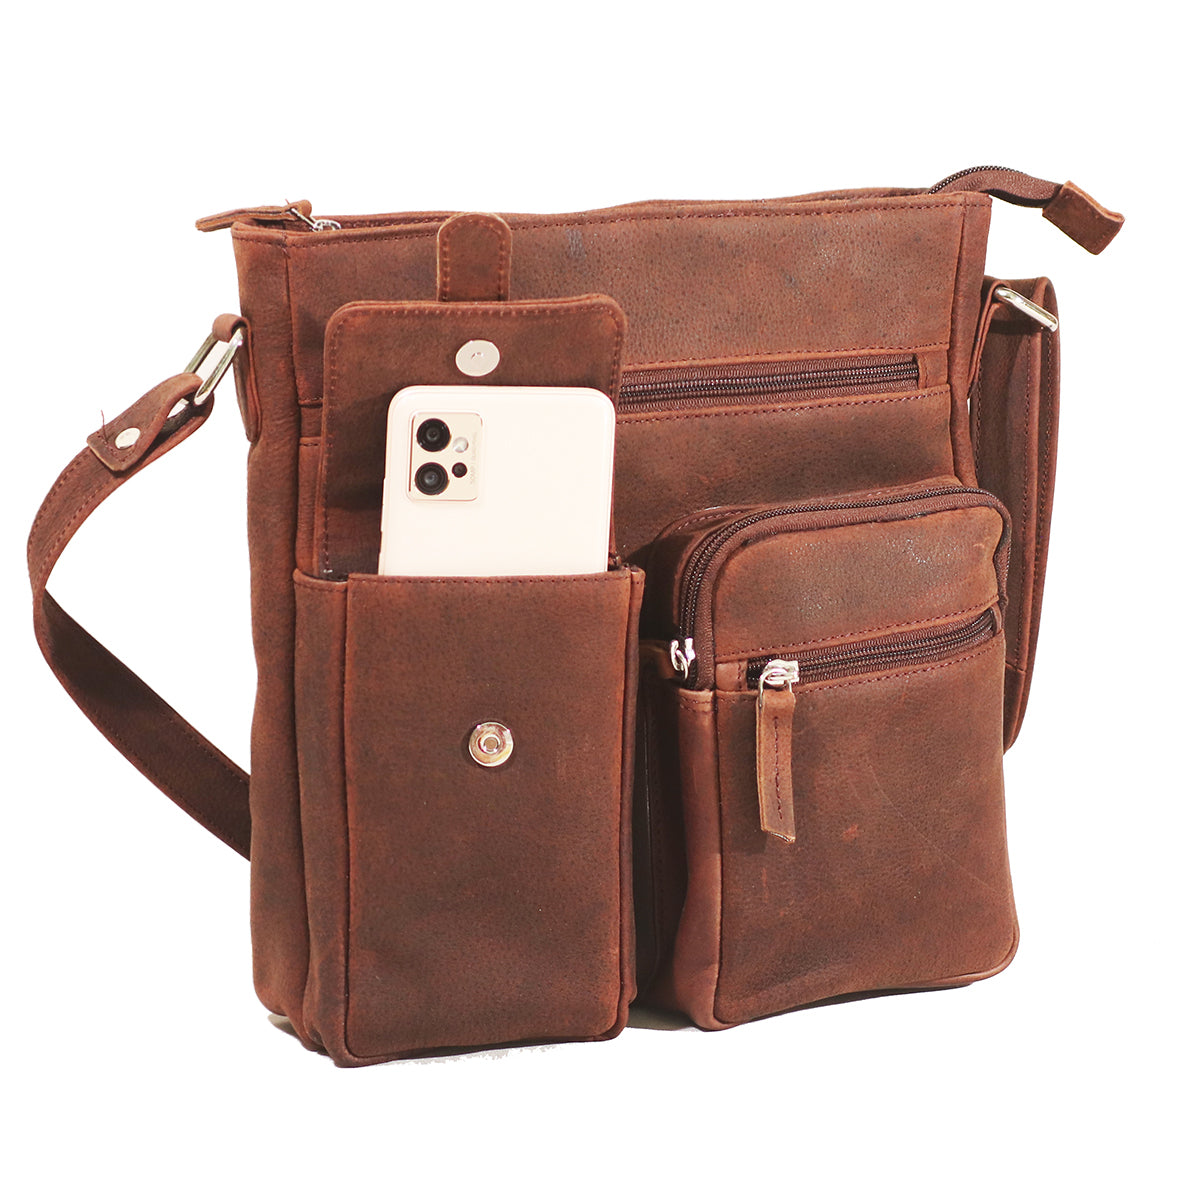 Unisex Sling Bag with Mobile Compartment